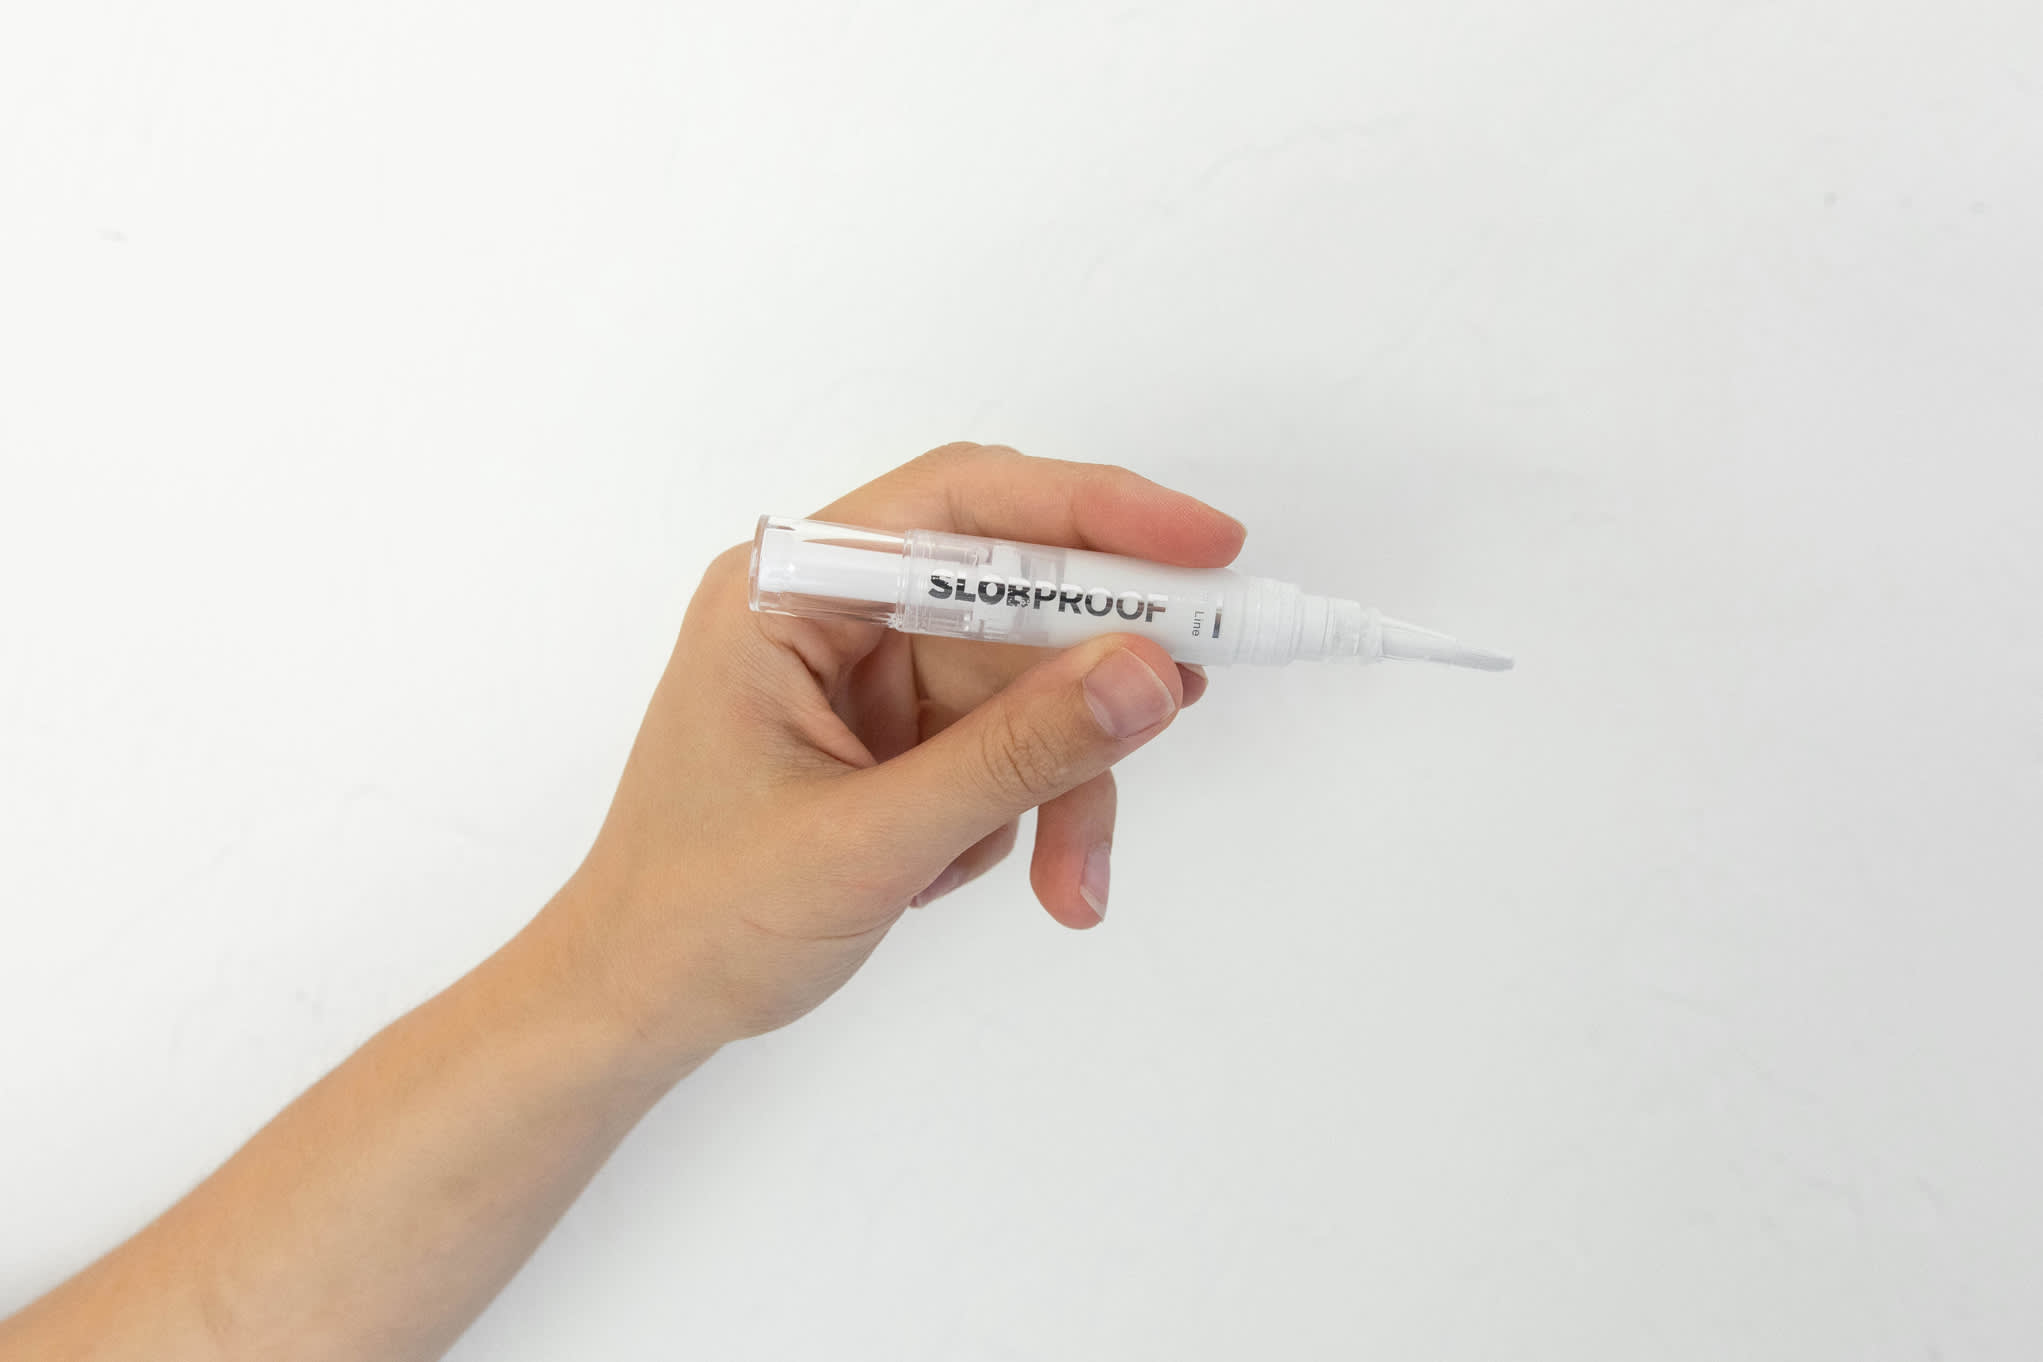 Paint Retouching Pens: Touch-up your walls quickly and easily